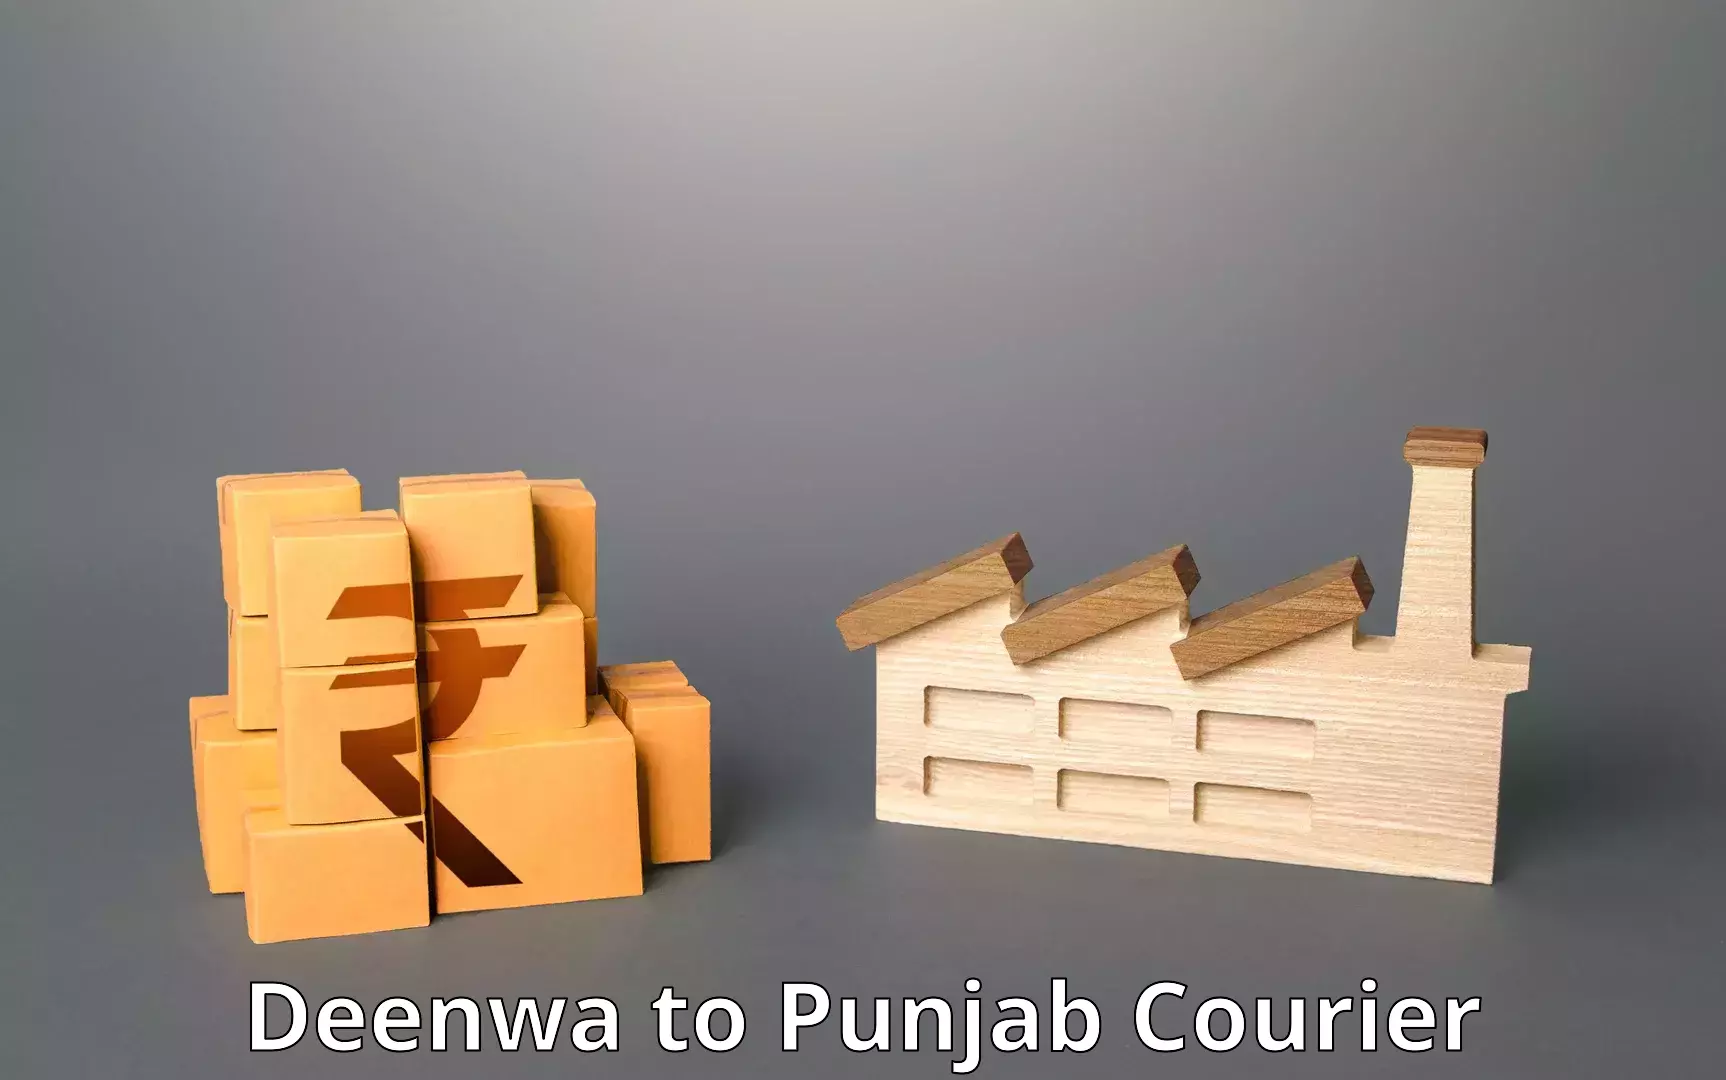 End-to-end delivery in Deenwa to Punjab